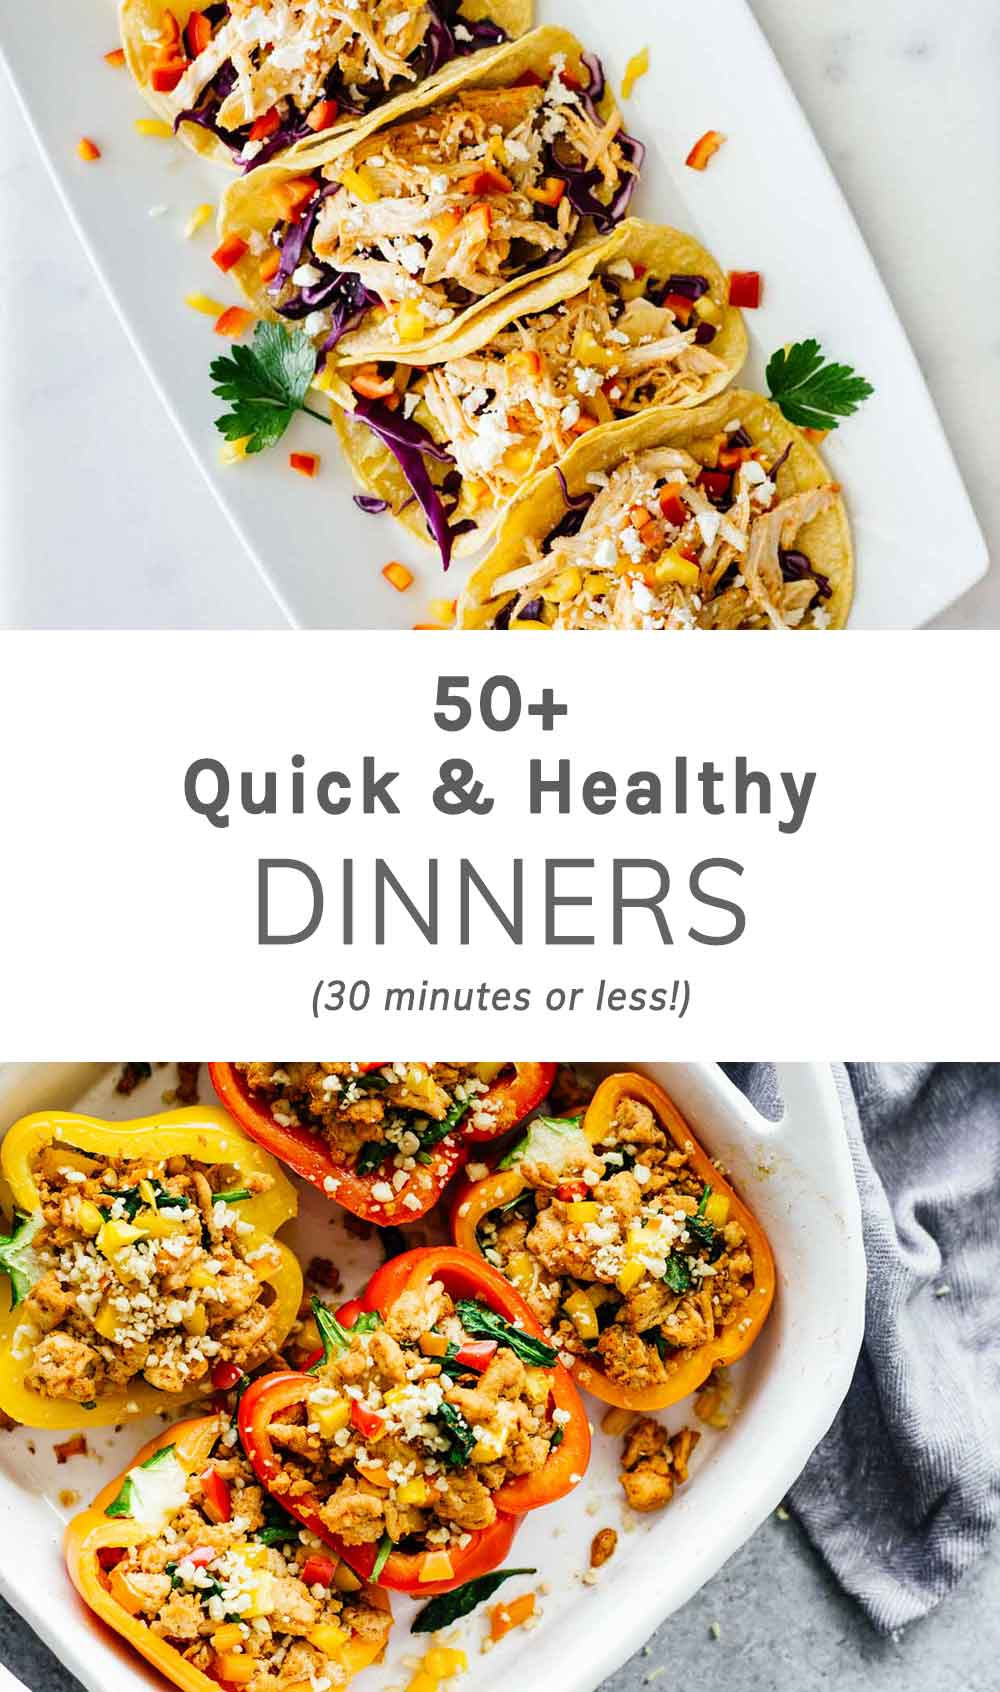 The Best Quick Healthy Dinner Ideas - Best Recipes Ideas and Collections